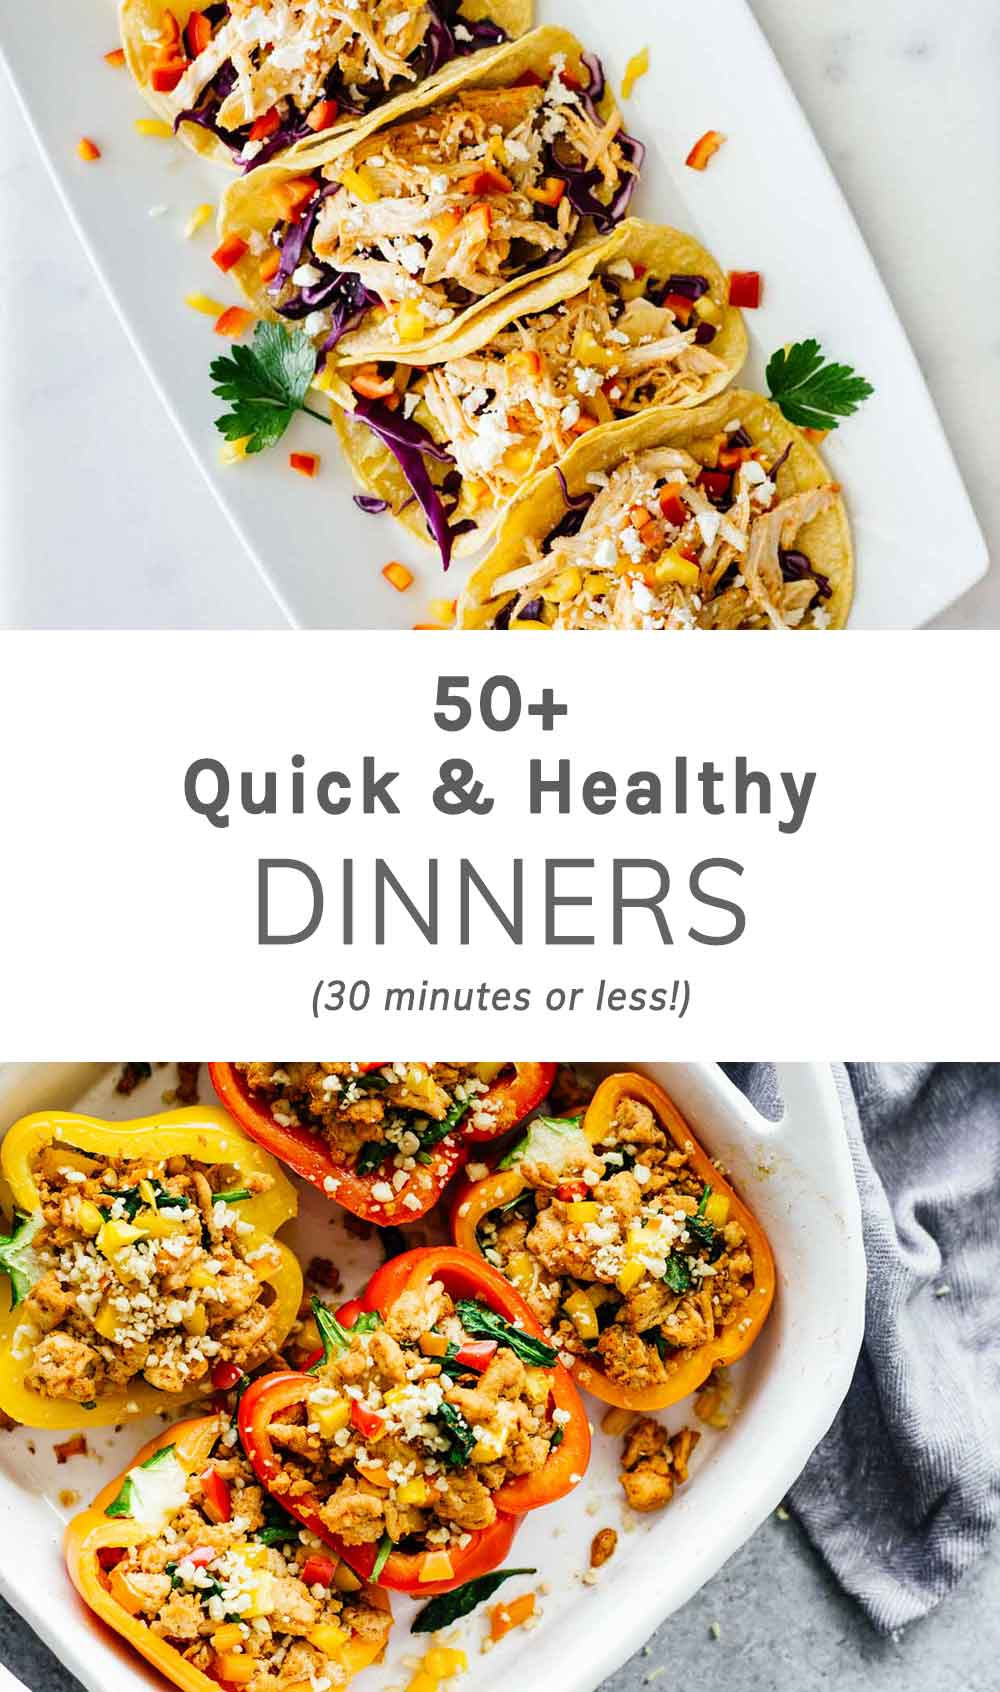 The Best Quick Healthy Dinner Ideas - Best Recipes Ideas and Collections